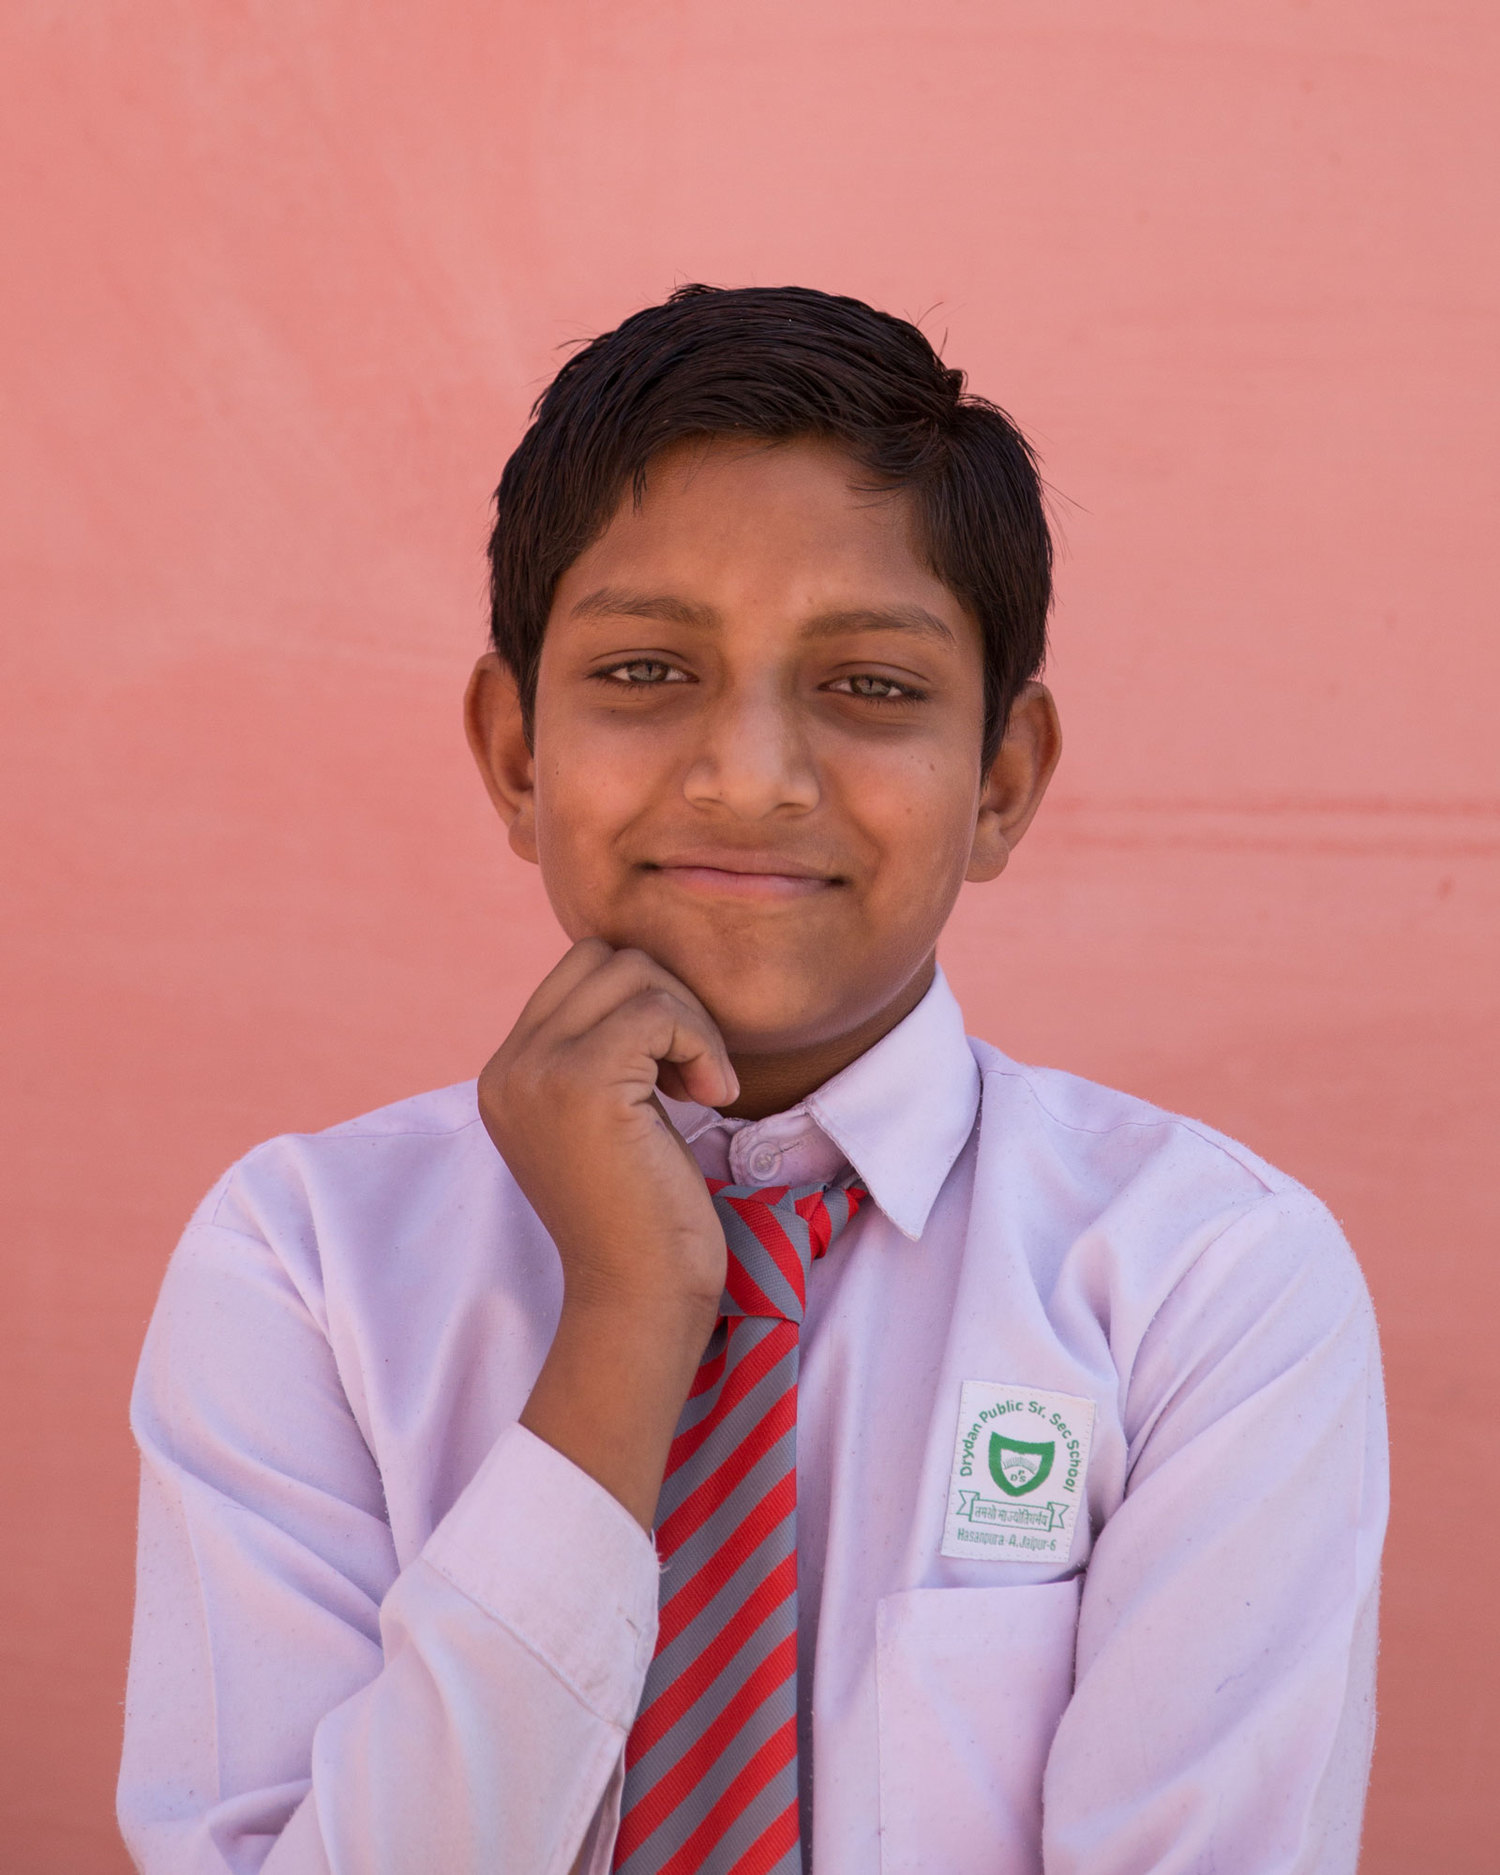   Akash Kadera, 6th class.  "I want to be an officer to make my parents proud. I want to protect others, and be responsible for the extinction of evil from society." 